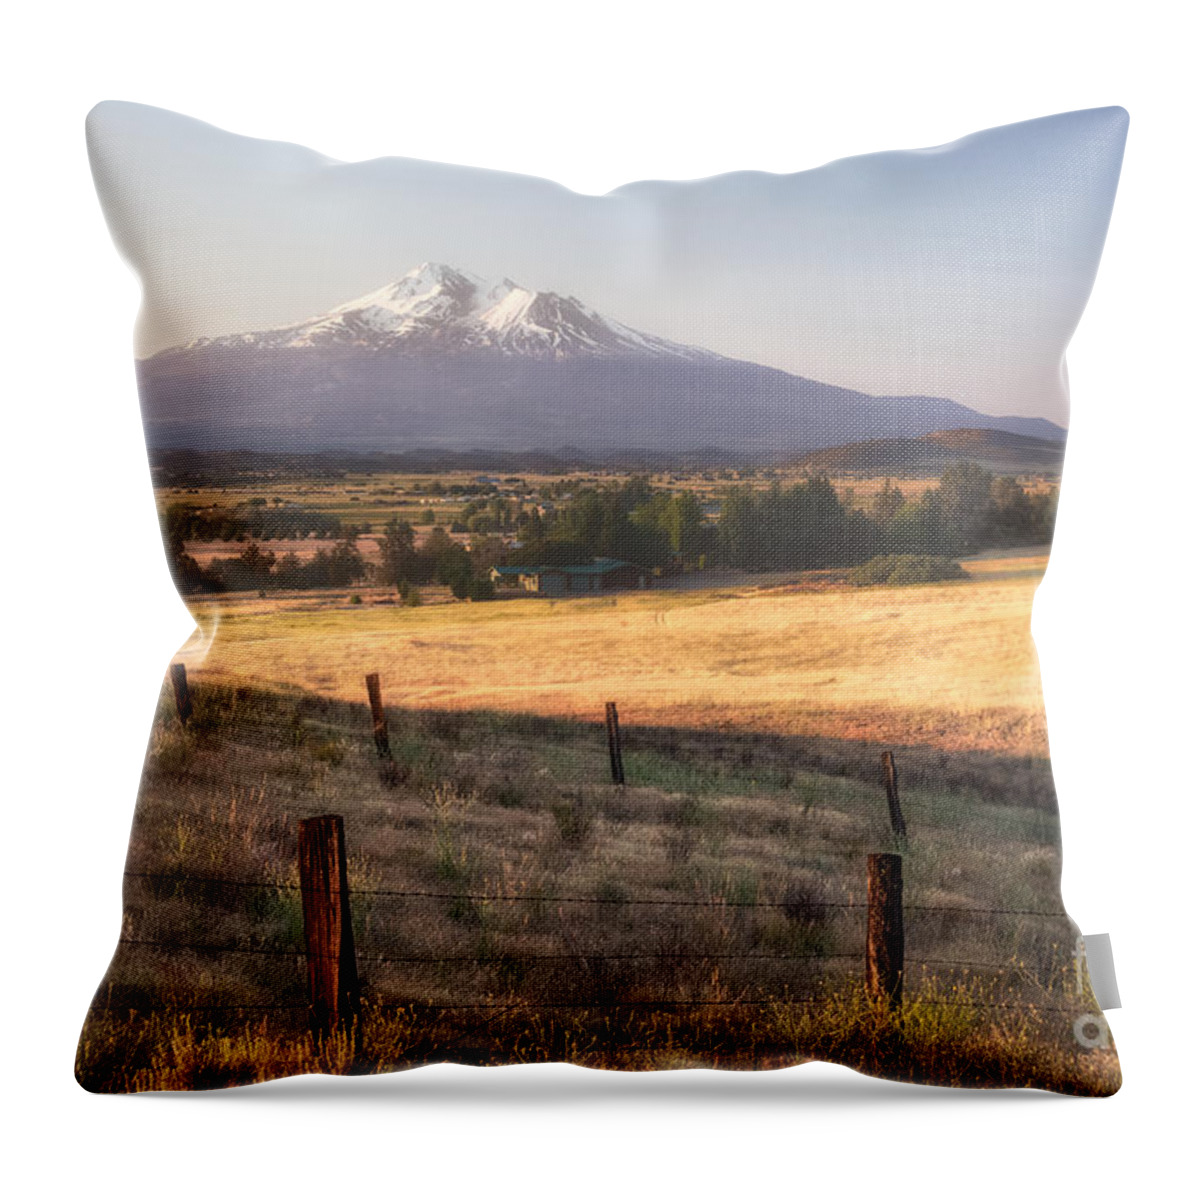 Mount Shasta Throw Pillow featuring the photograph Sunrise Mount Shasta by Anthony Michael Bonafede